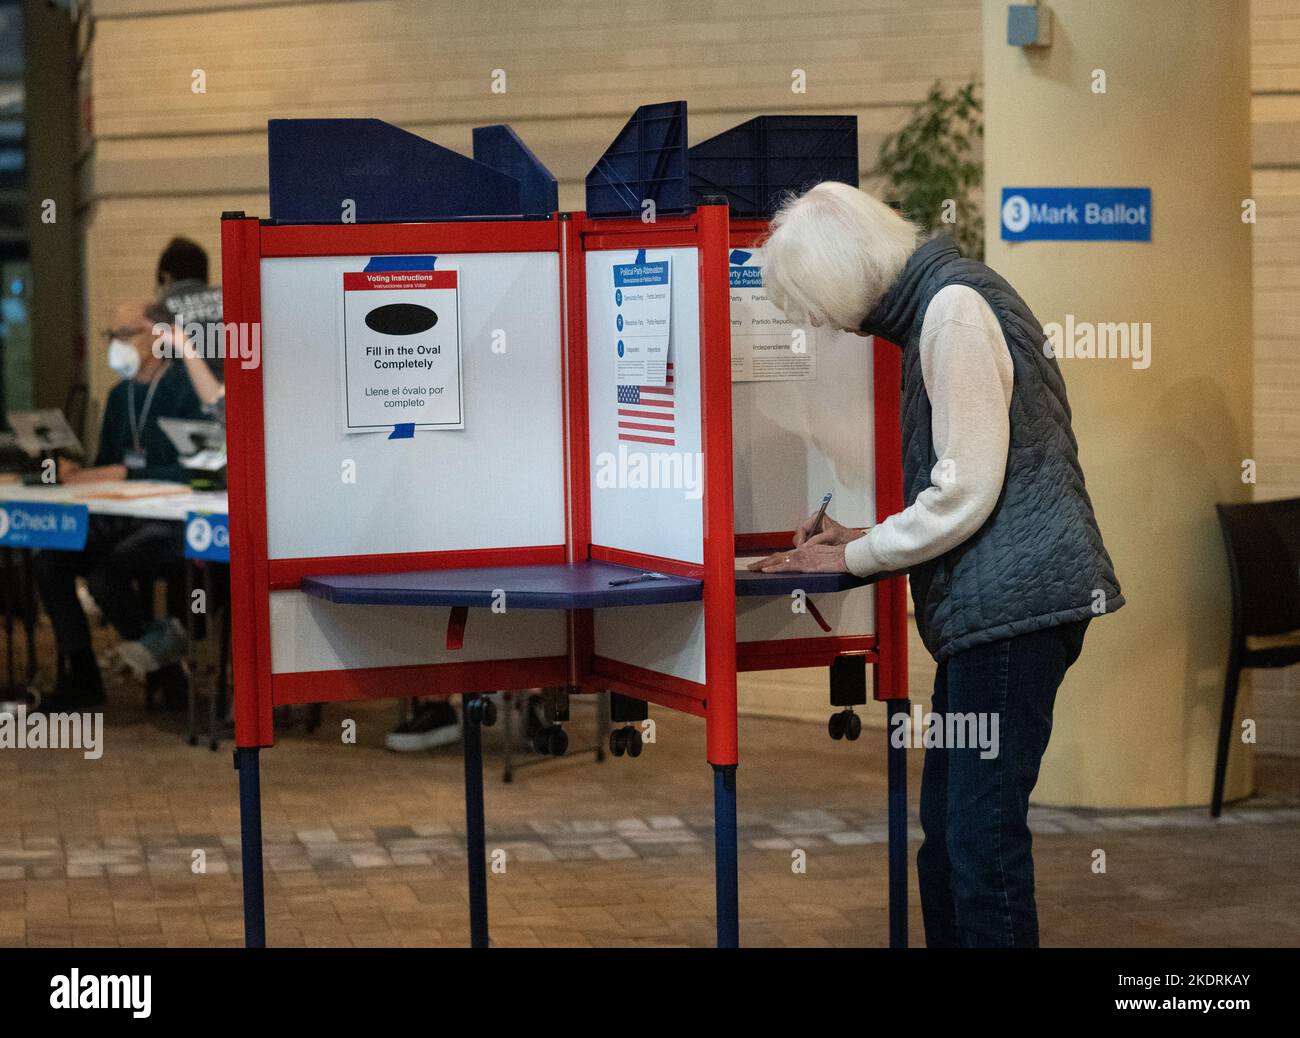 Arlington, USA. 8th Nov, 2022. A woman fills in her ballot during the U.S. midterm elections at a polling station in Arlington, Virginia, the United States, Nov. 8, 2022. Concerned voters across the United States are going to the polls to cast their ballots in the 2022 midterm elections on Tuesday amid heightened partisanship and divide. Credit: Liu Jie/Xinhua/Alamy Live News Stock Photo